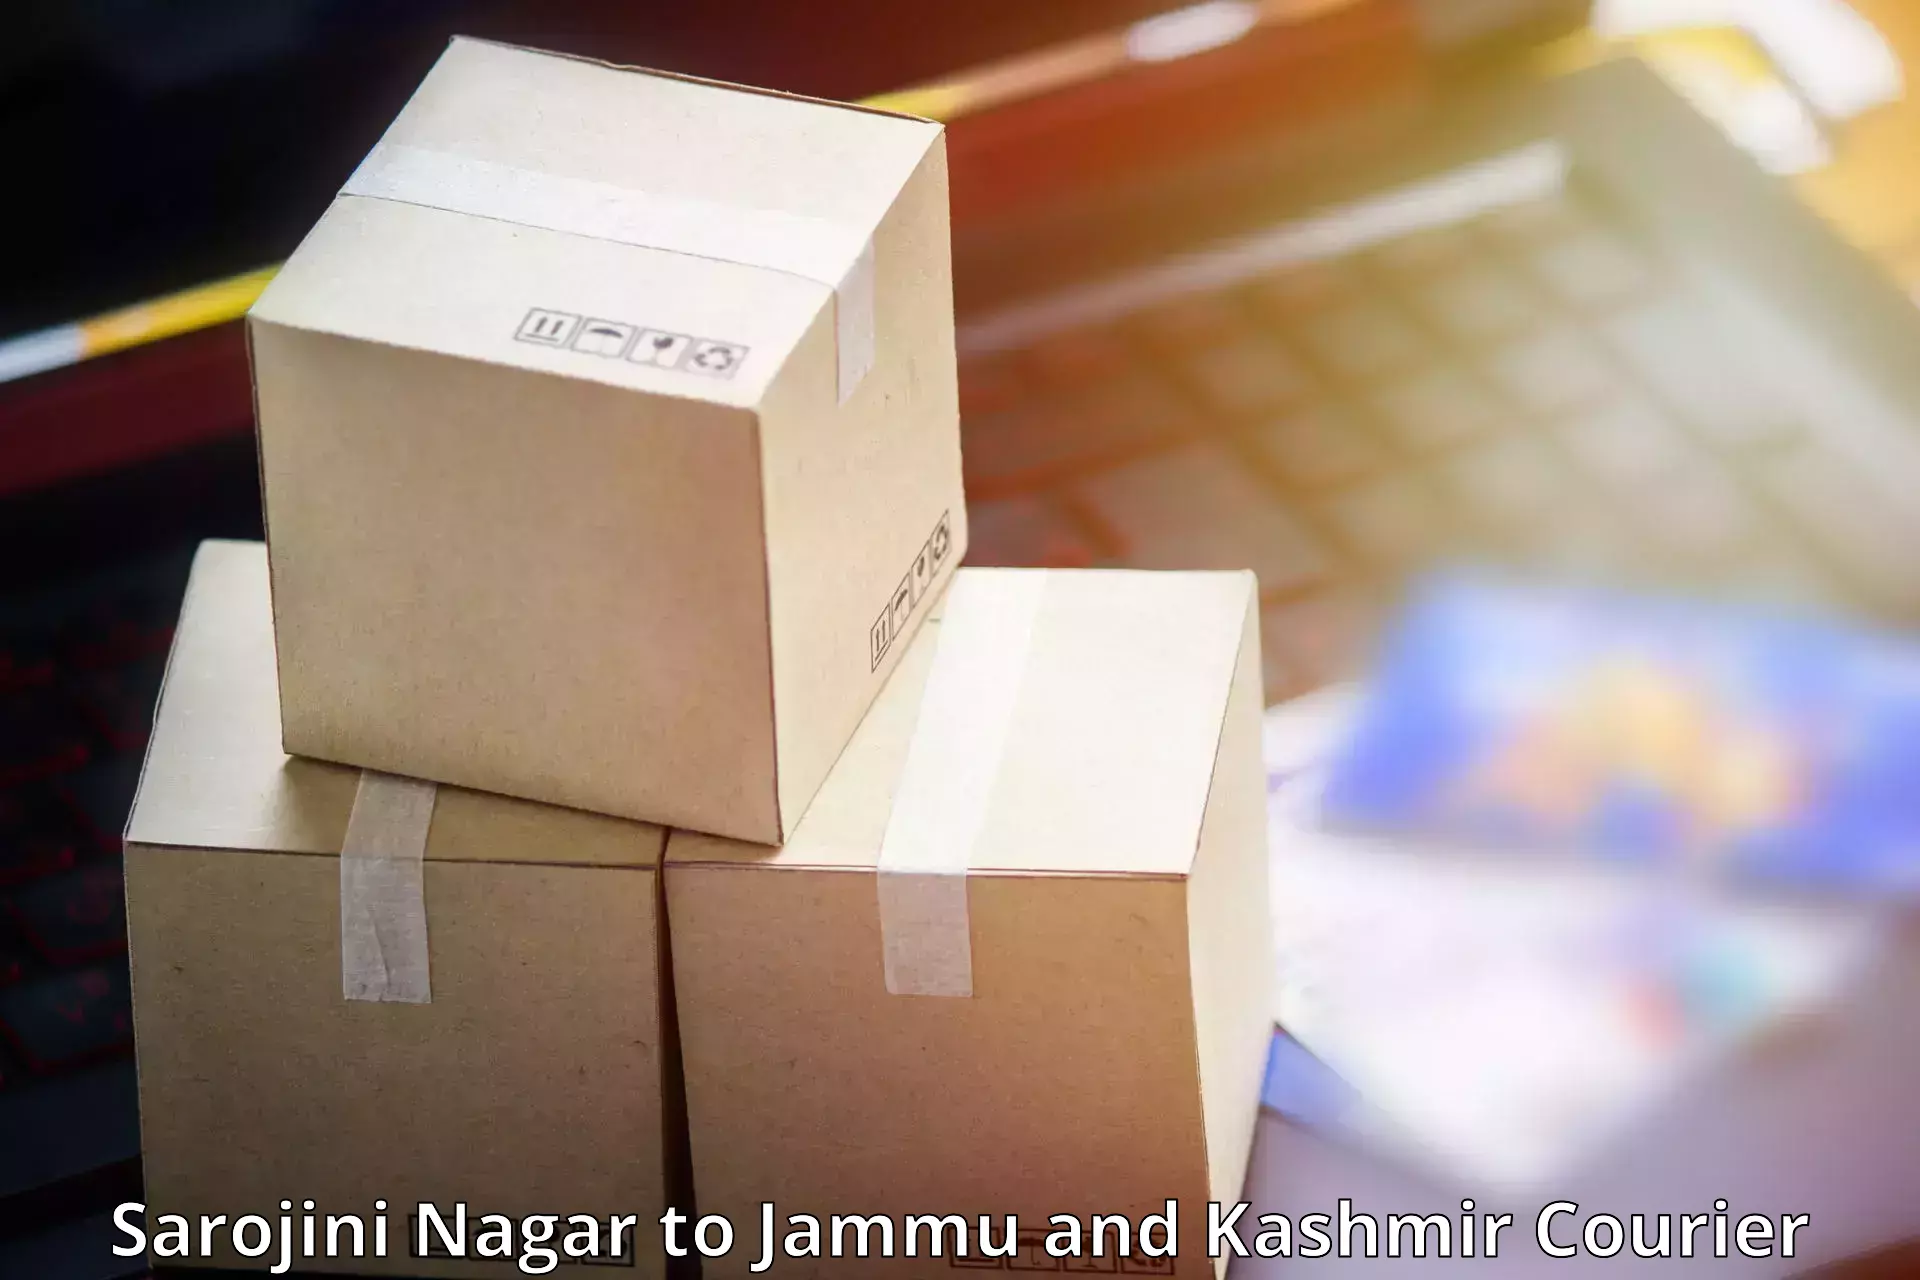 State-of-the-art courier technology Sarojini Nagar to Leh